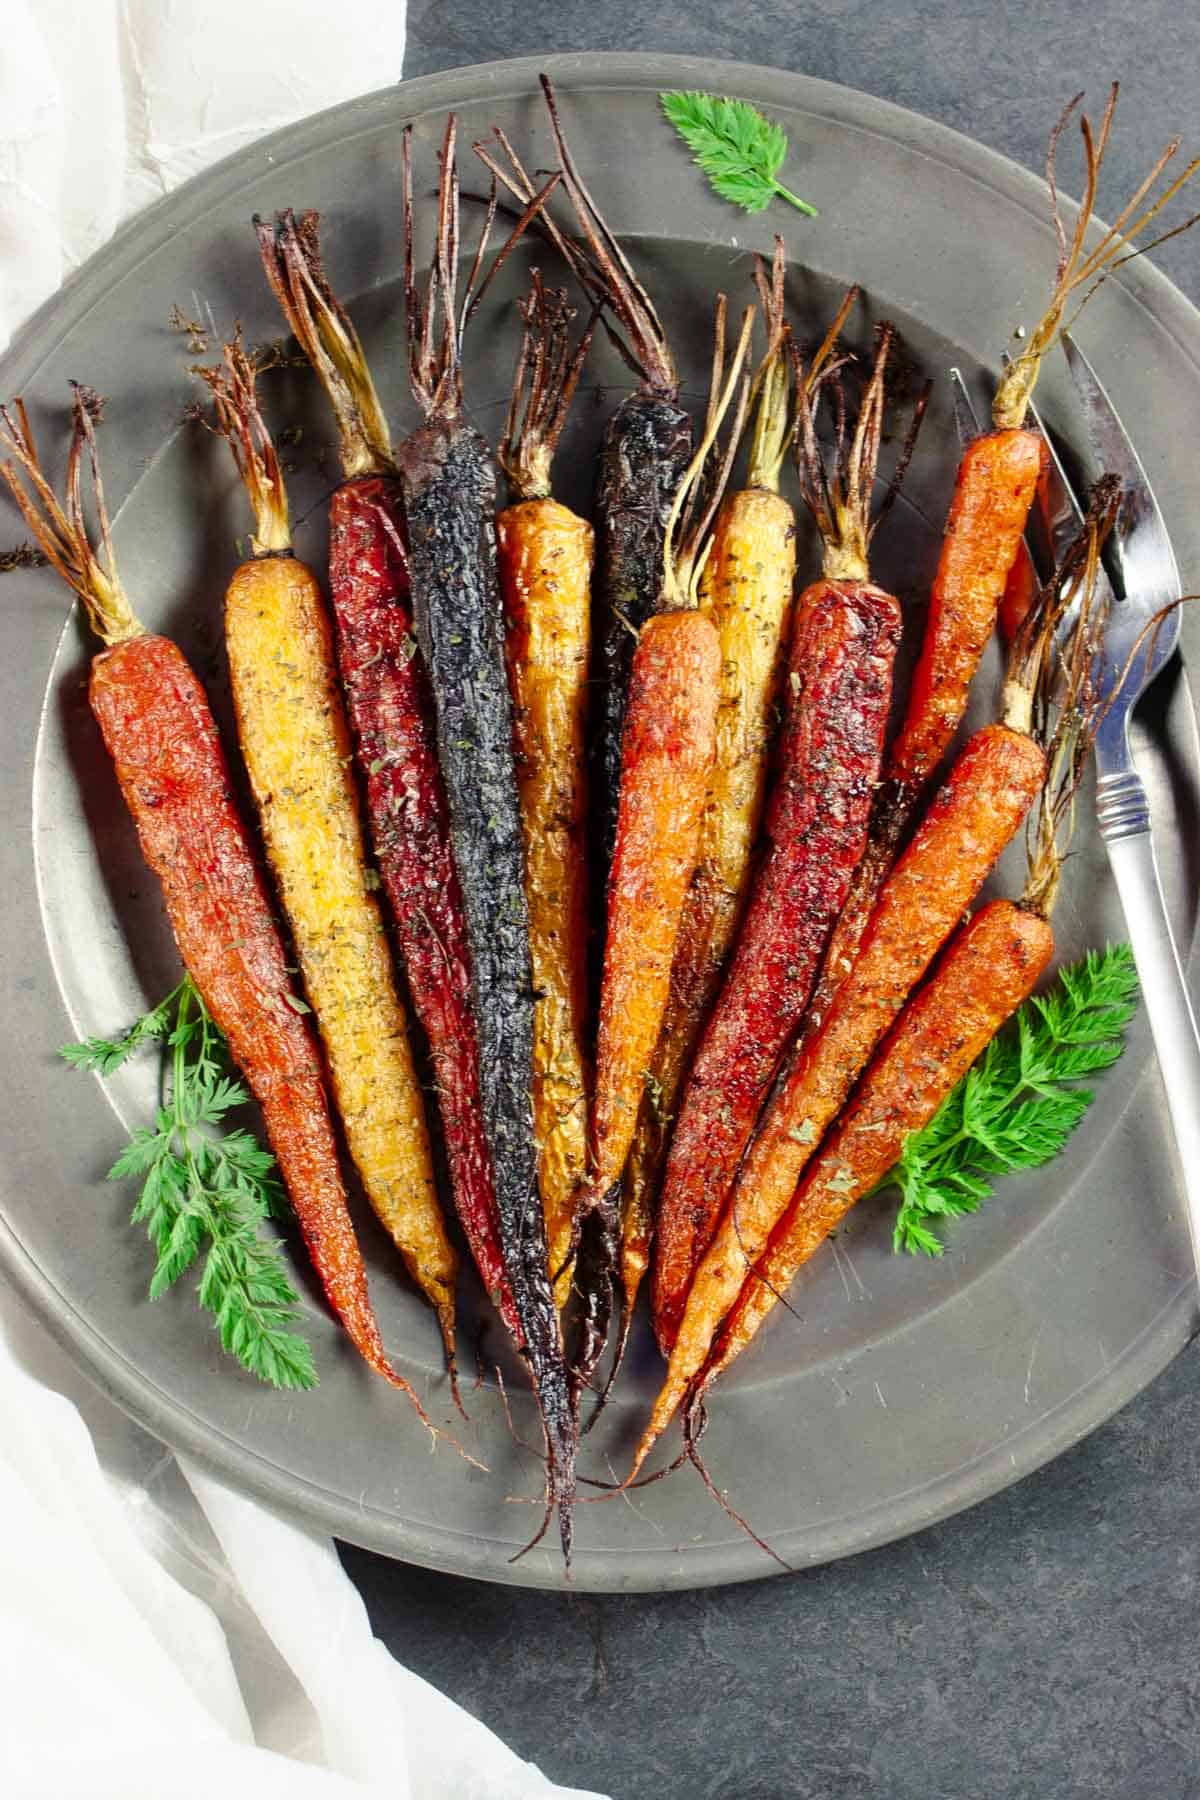 Roasted carrots on a silver plate with carrot top garnish and fork.